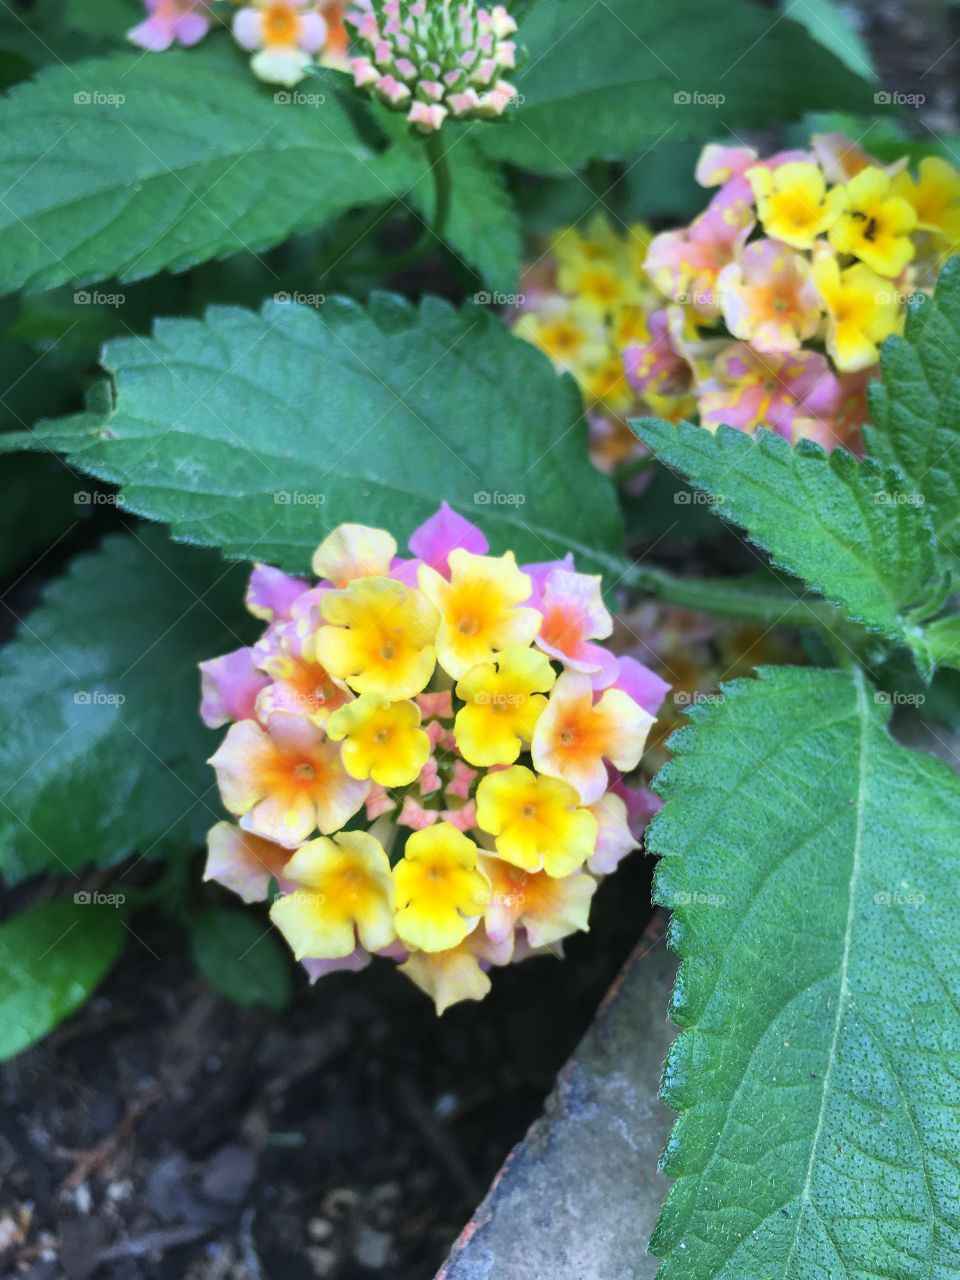 The Lantana is starting to bloom! Gorgeous colors on this guy